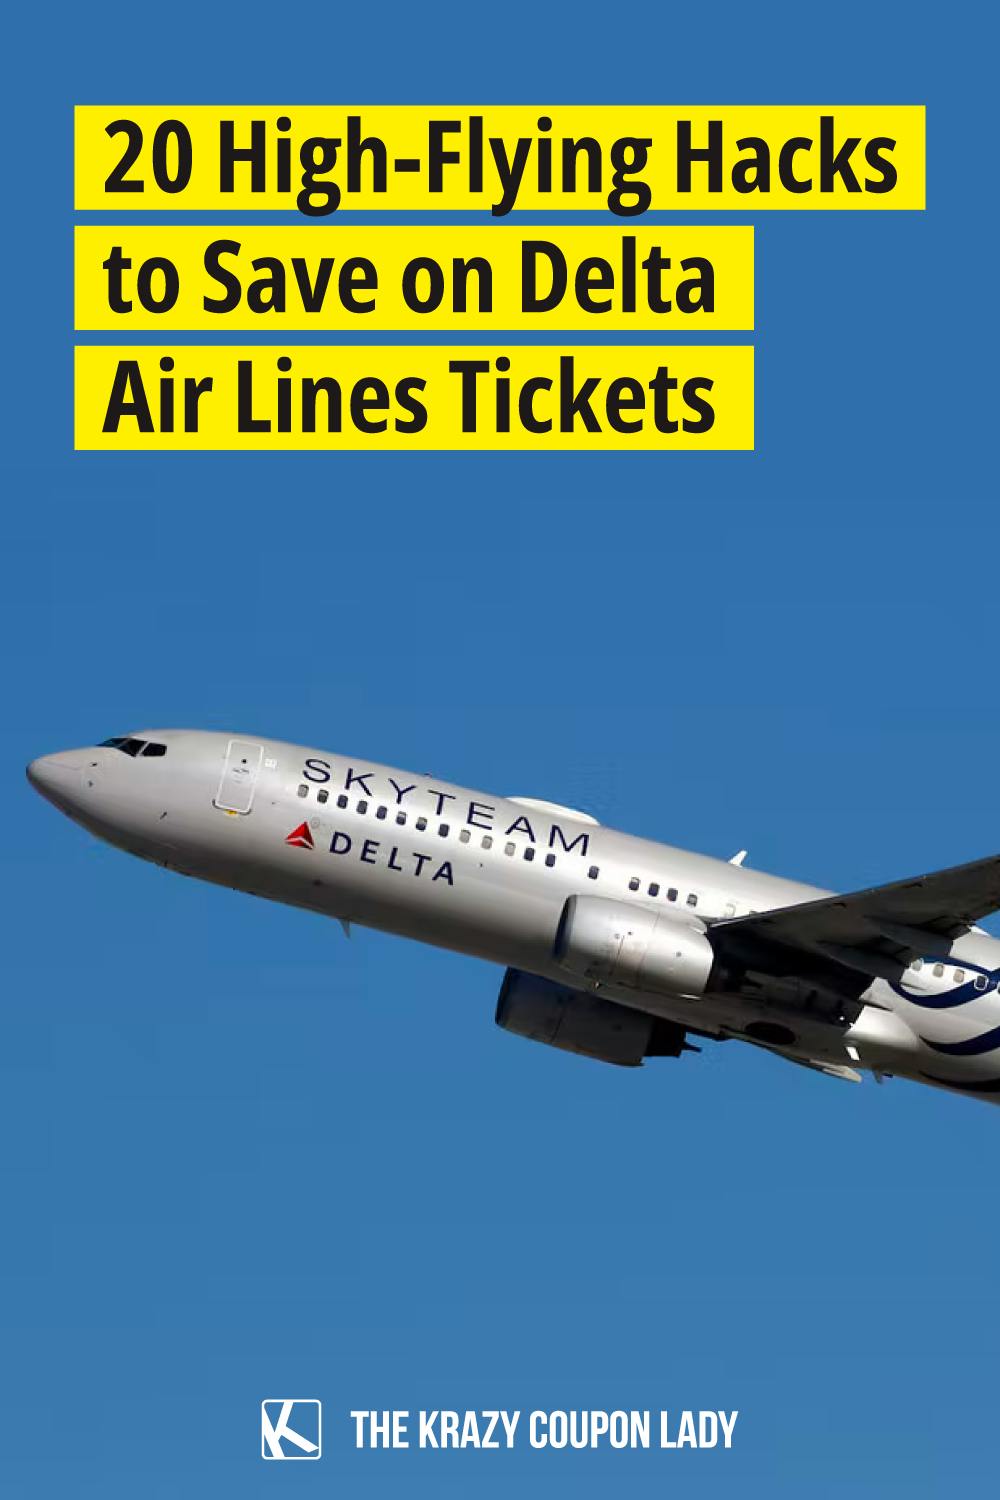 22 High-Flying Hacks to Save on Delta Air Lines Tickets